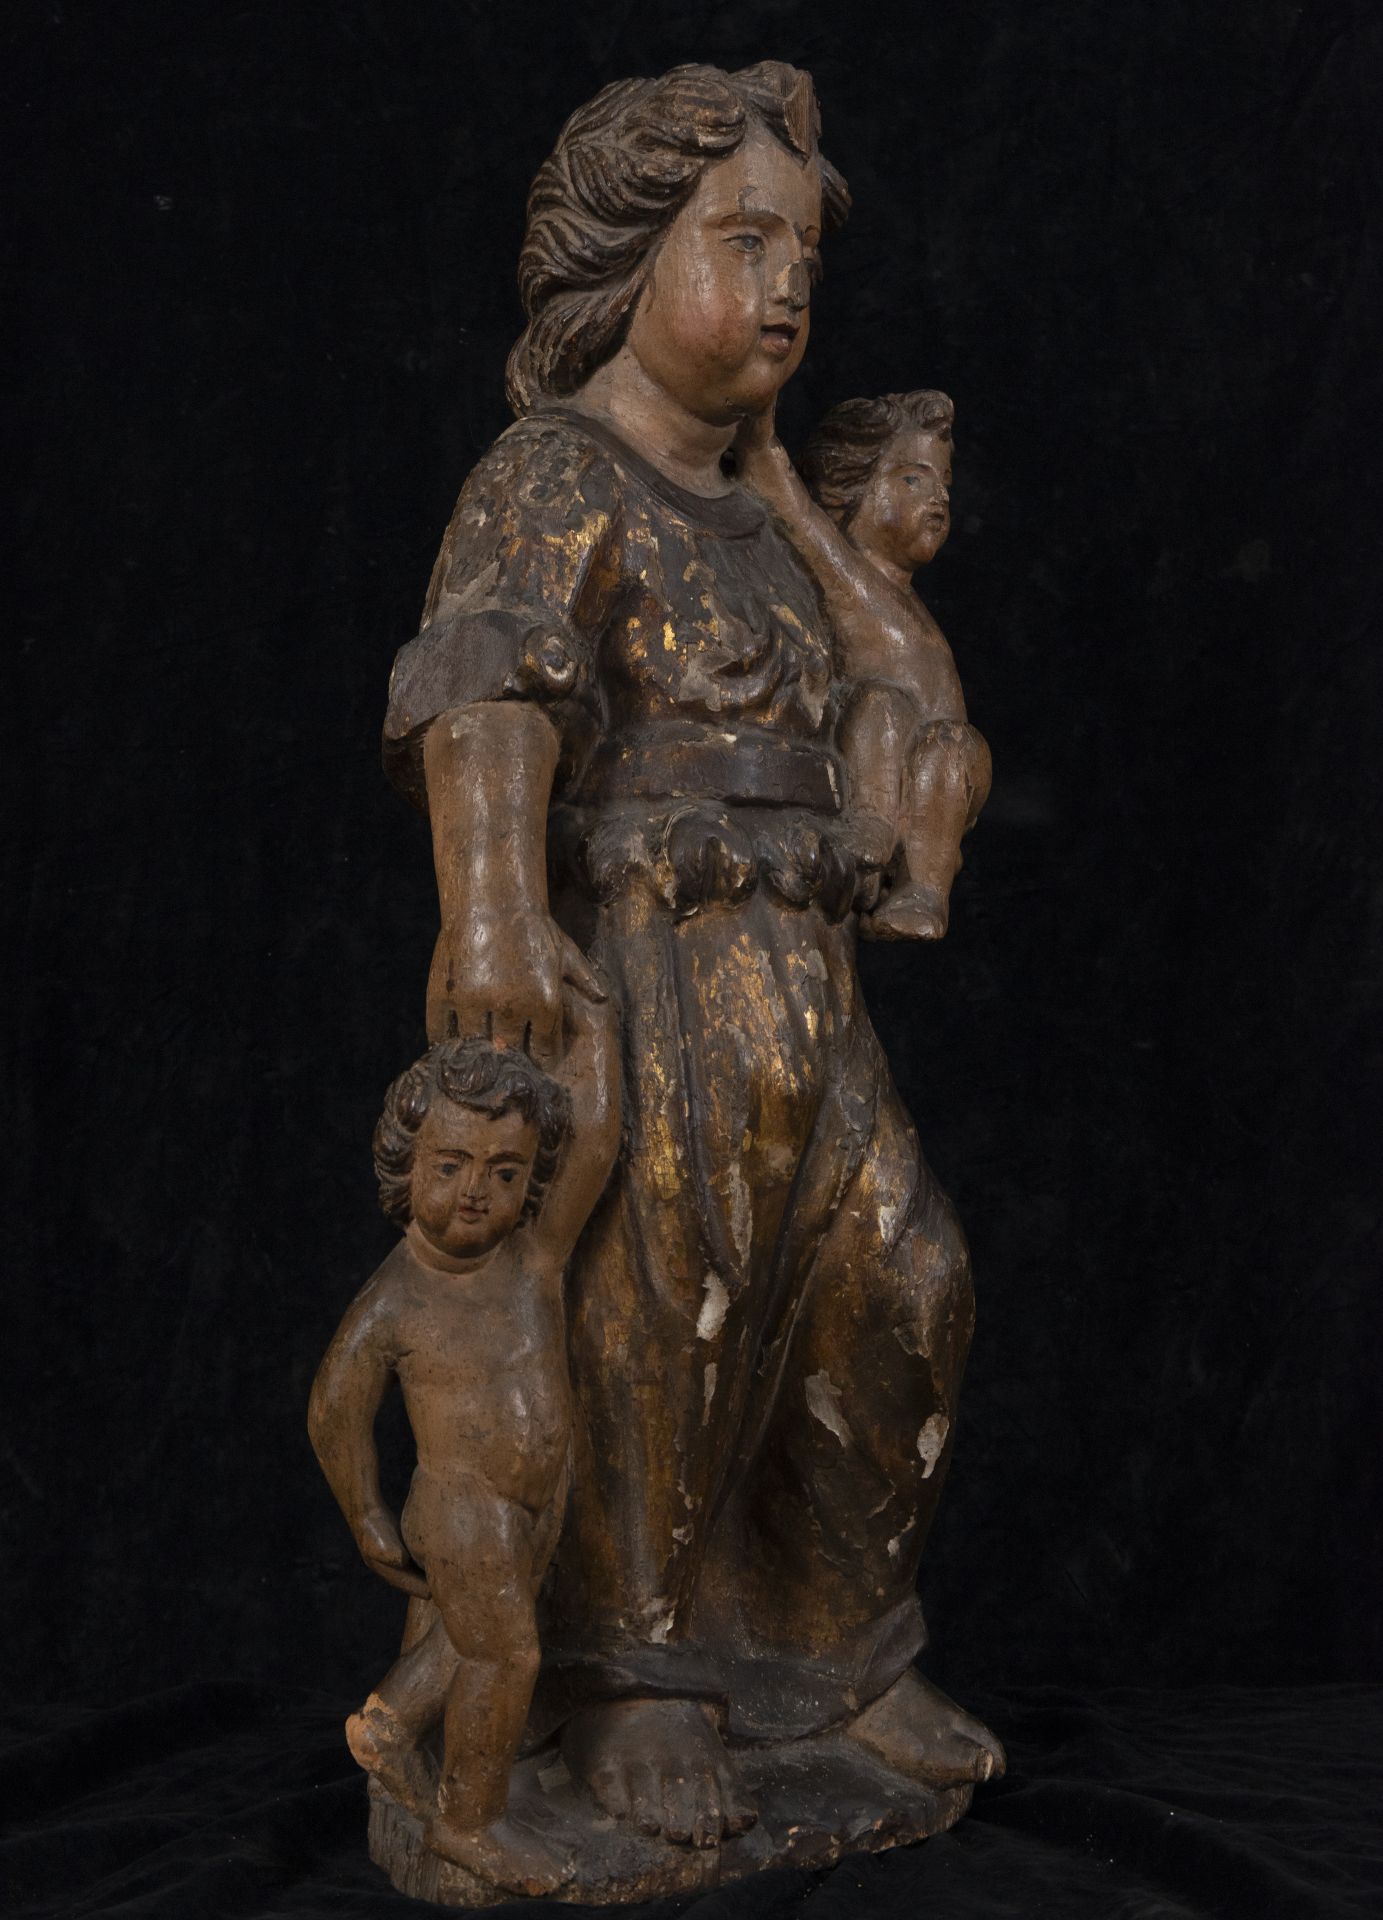 17th century Portuguese Virgin with Child in her arms, 17th century - Image 7 of 10